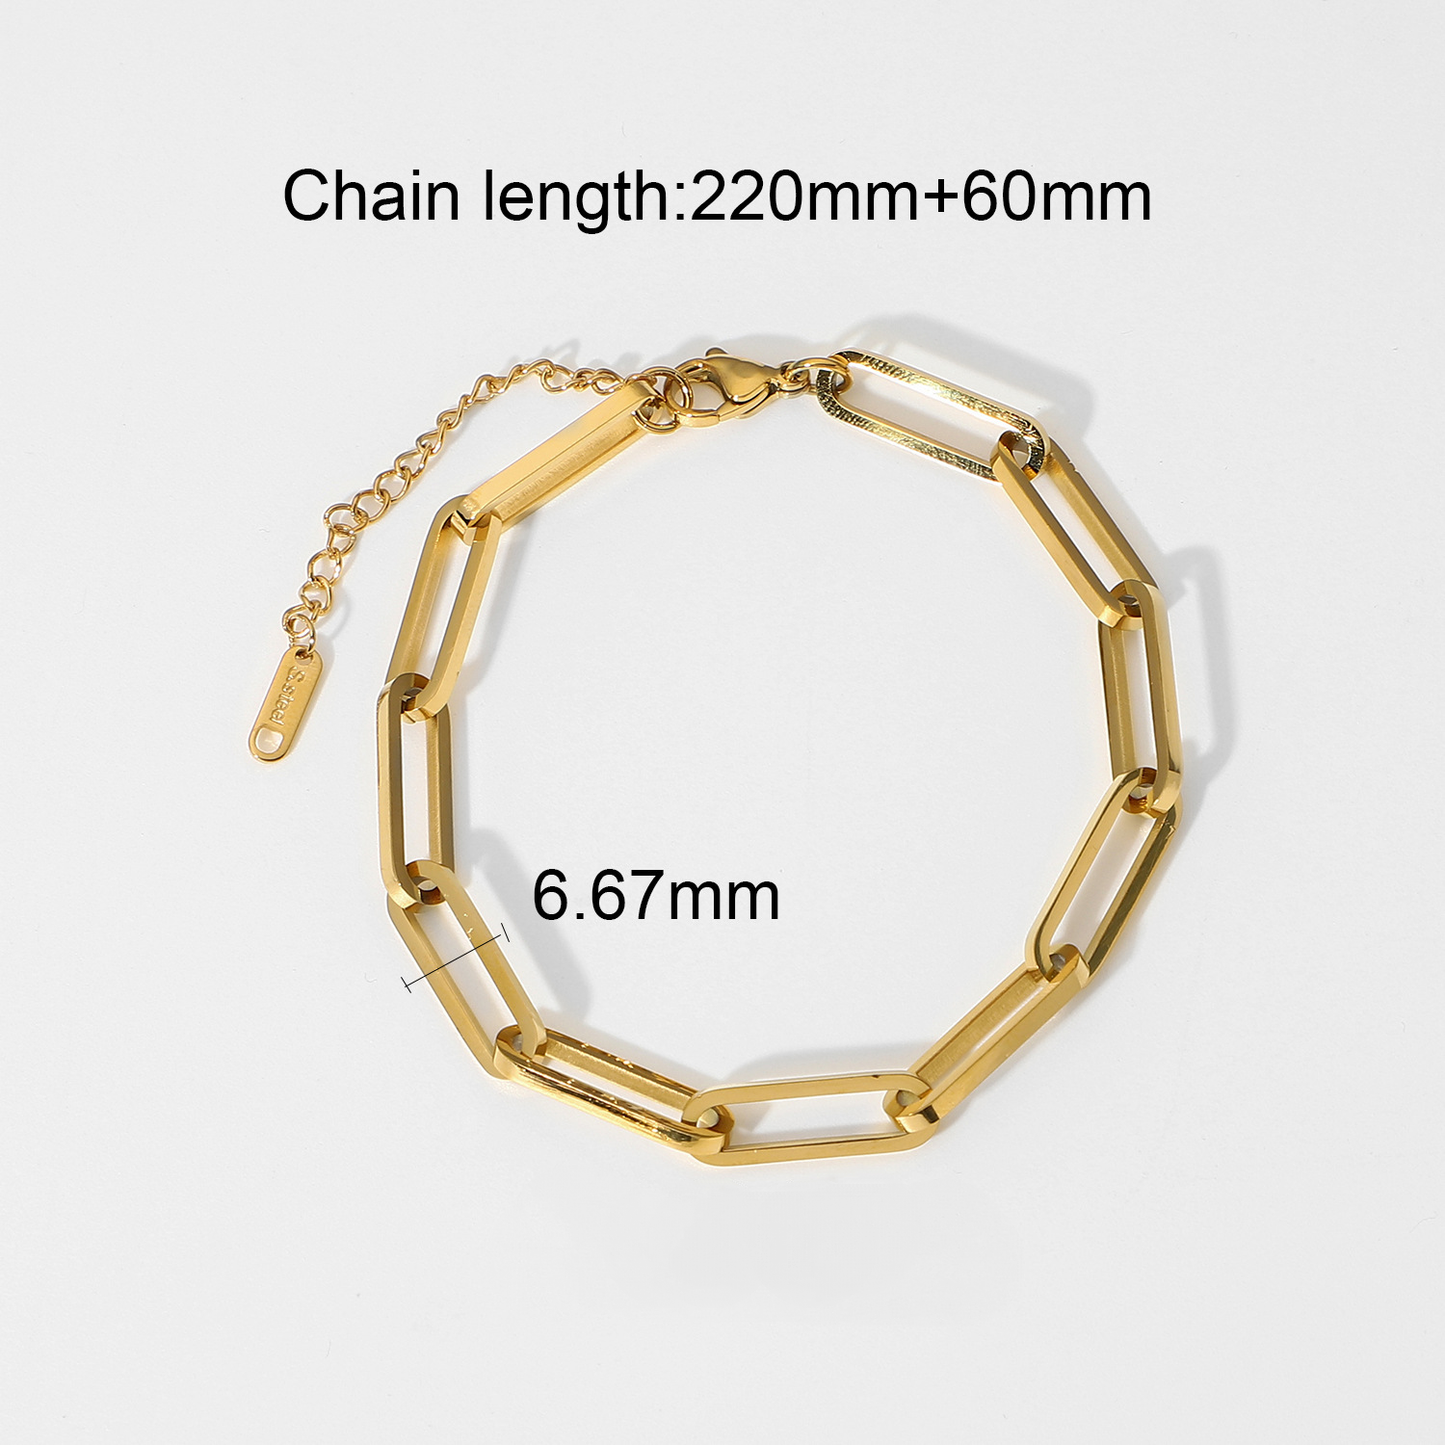 Clare 18K Gold Plated Stainless Steel Chain Bracelets